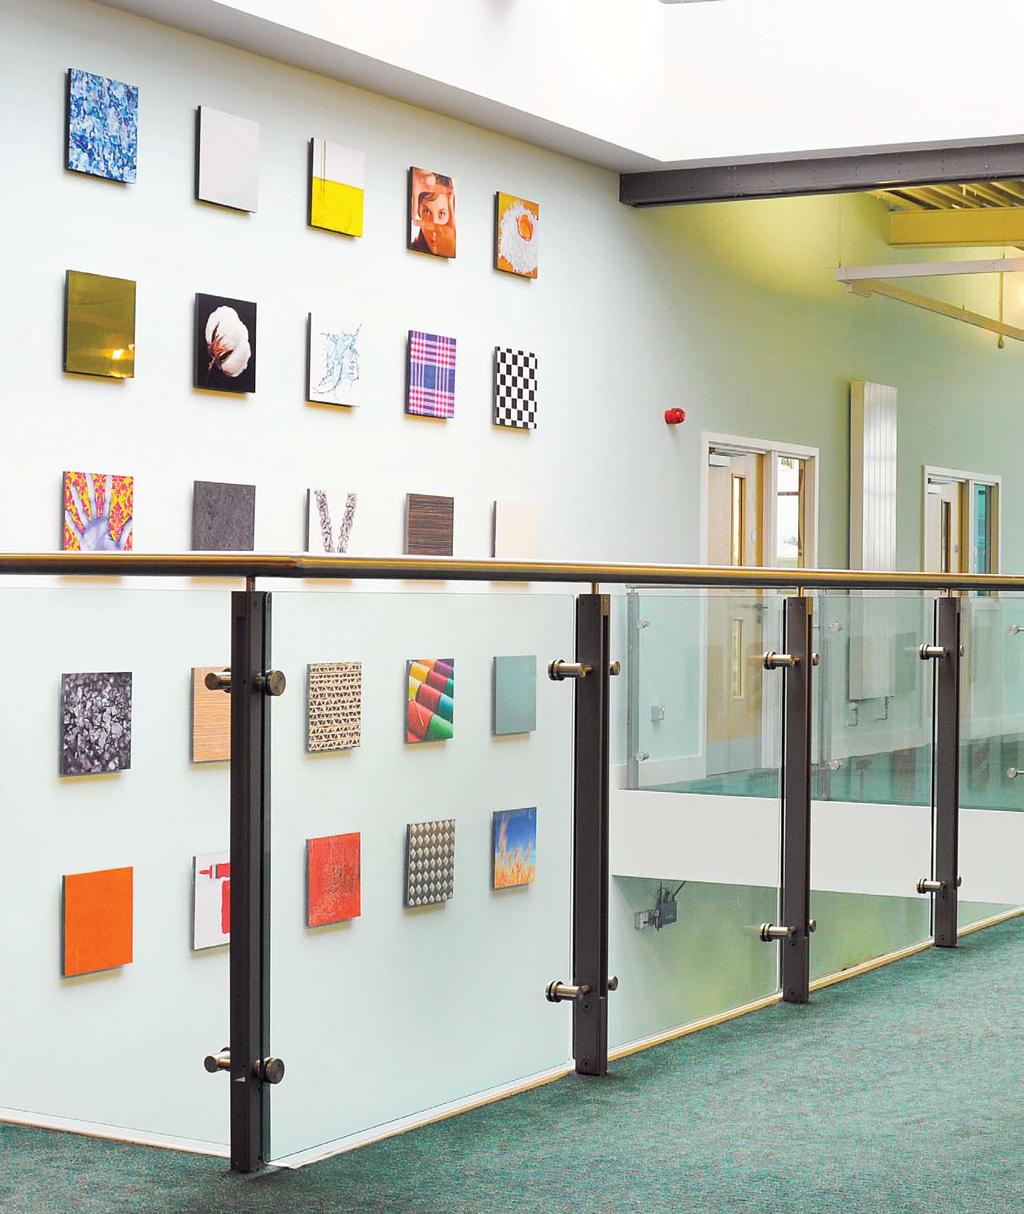 Balustrade specifications Polyester powder coated Suitable for use in busy everyday environments such as hospitals, schools, care